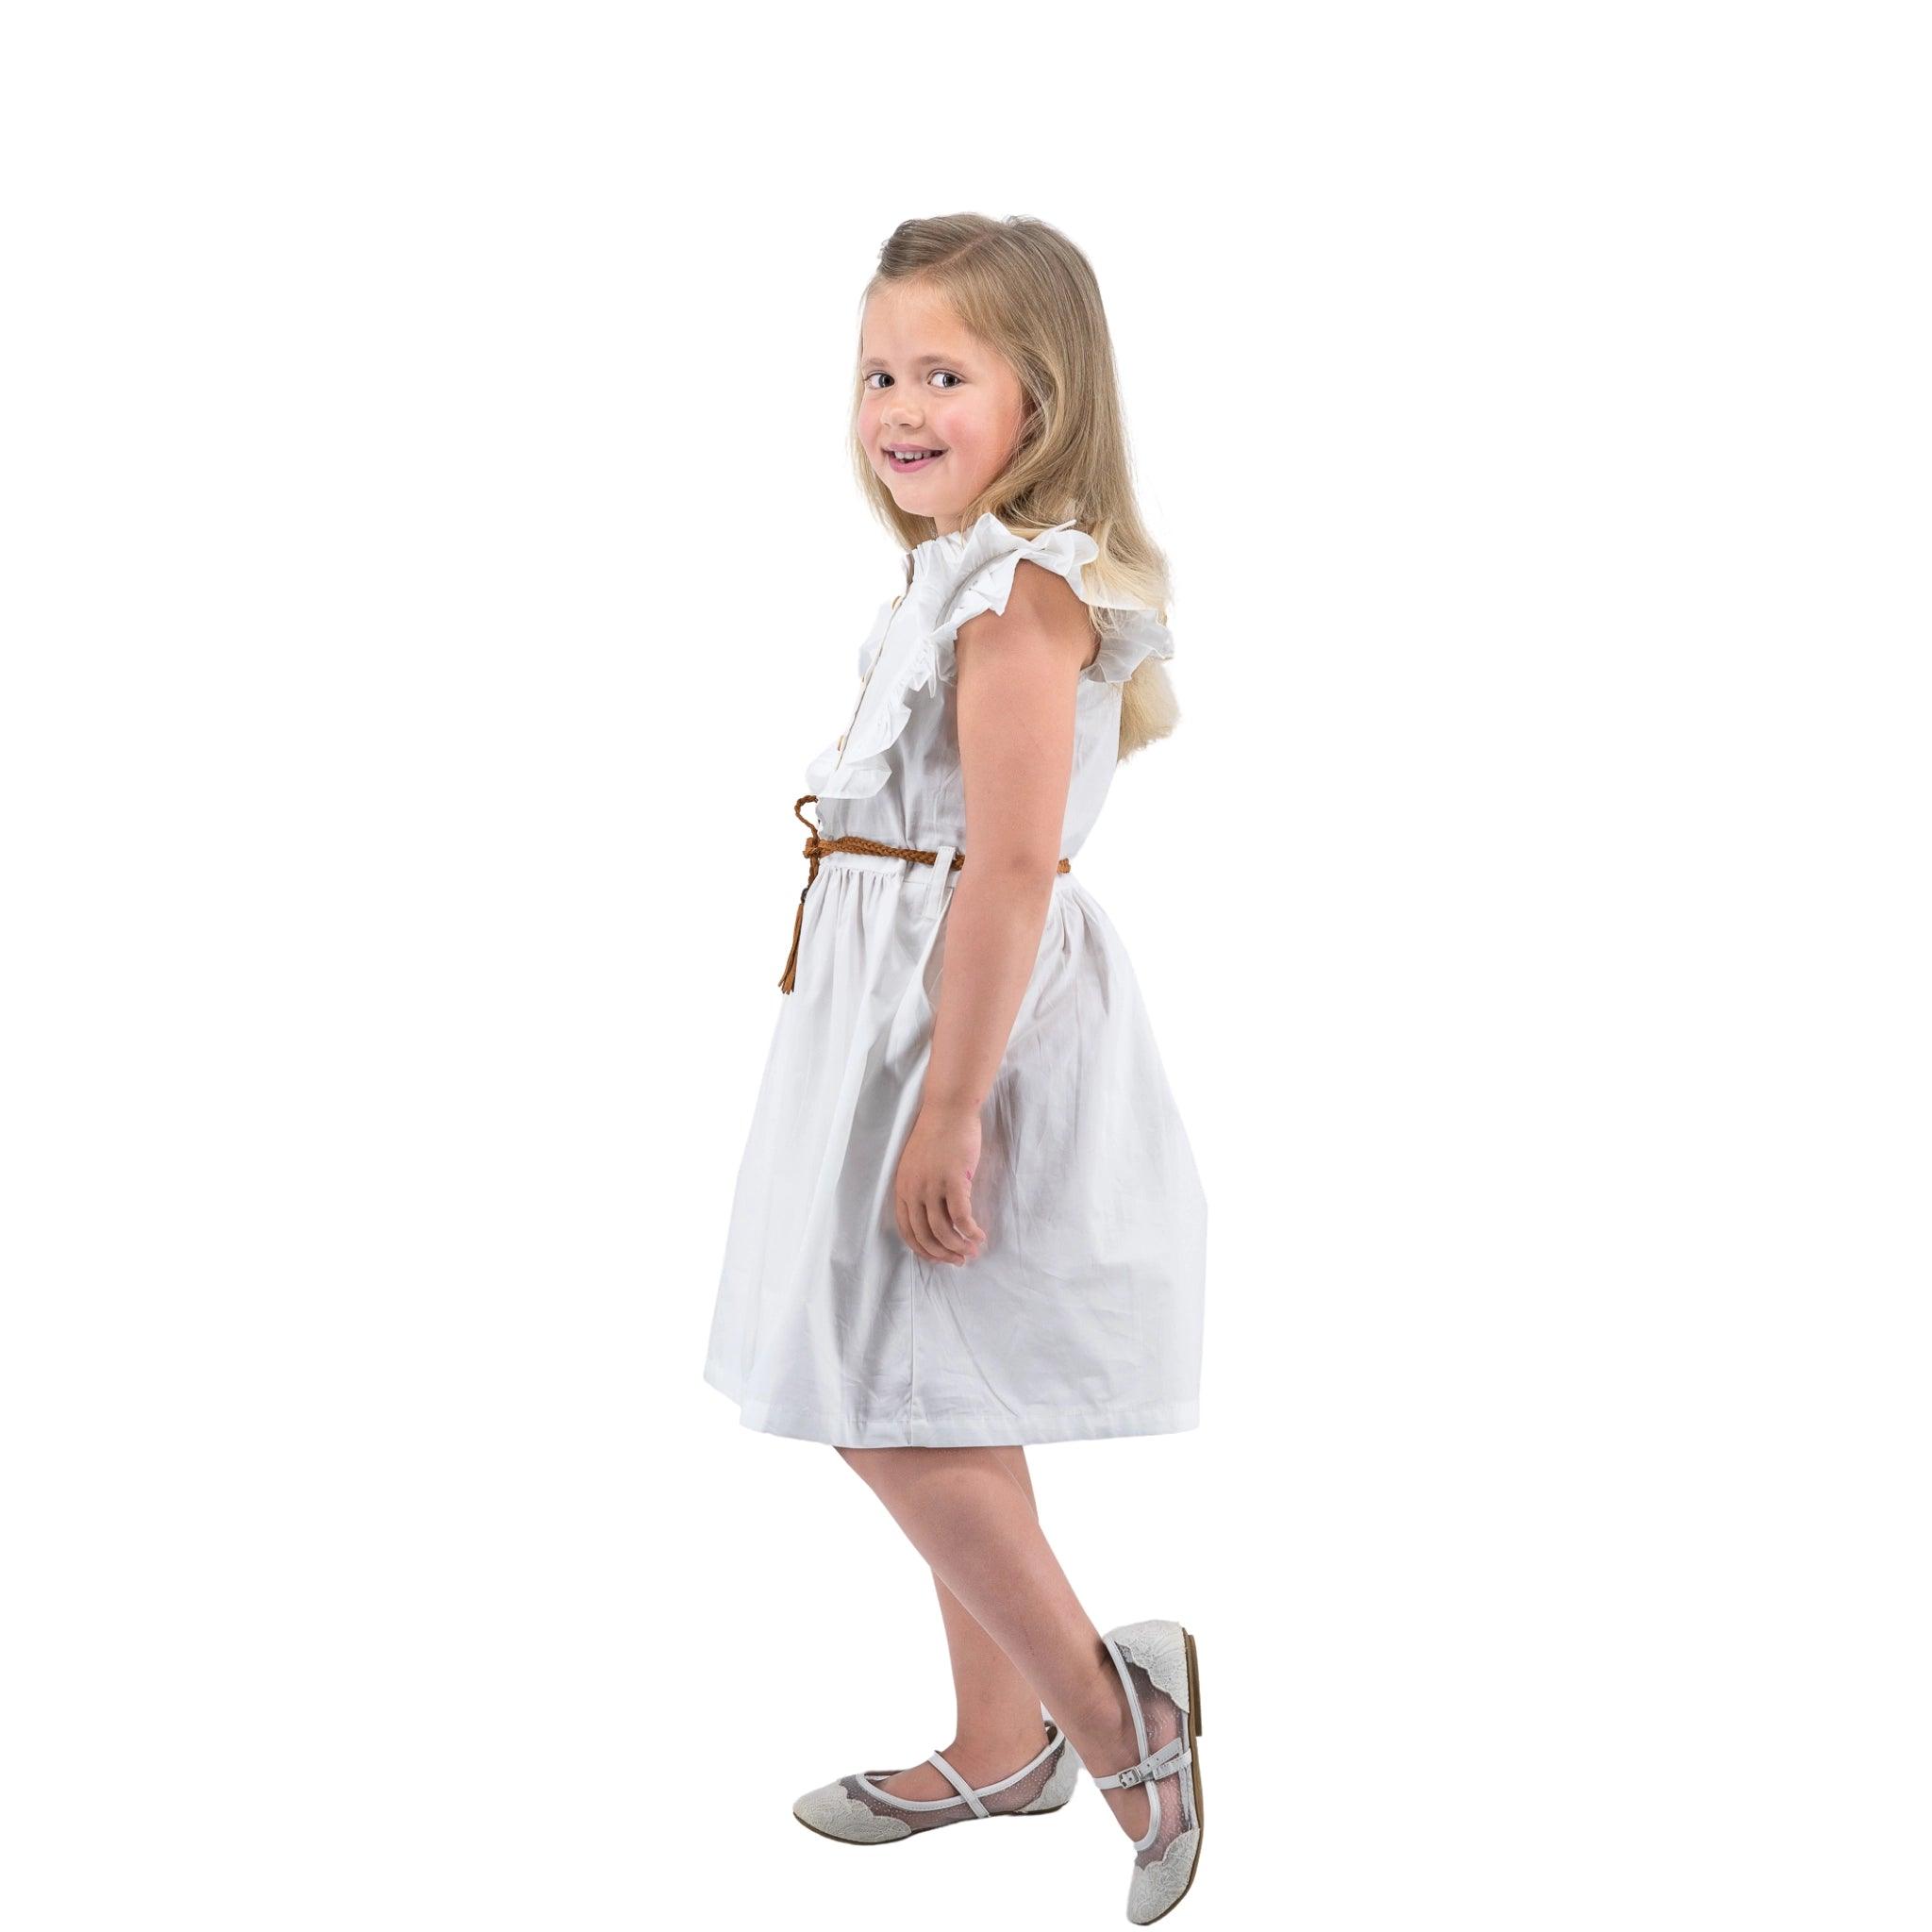 Young girl smiling, walking to her left side, dressed in a Karee white Butterfly Sleeve Cotton Dress with silver shoes, isolated on a white background.